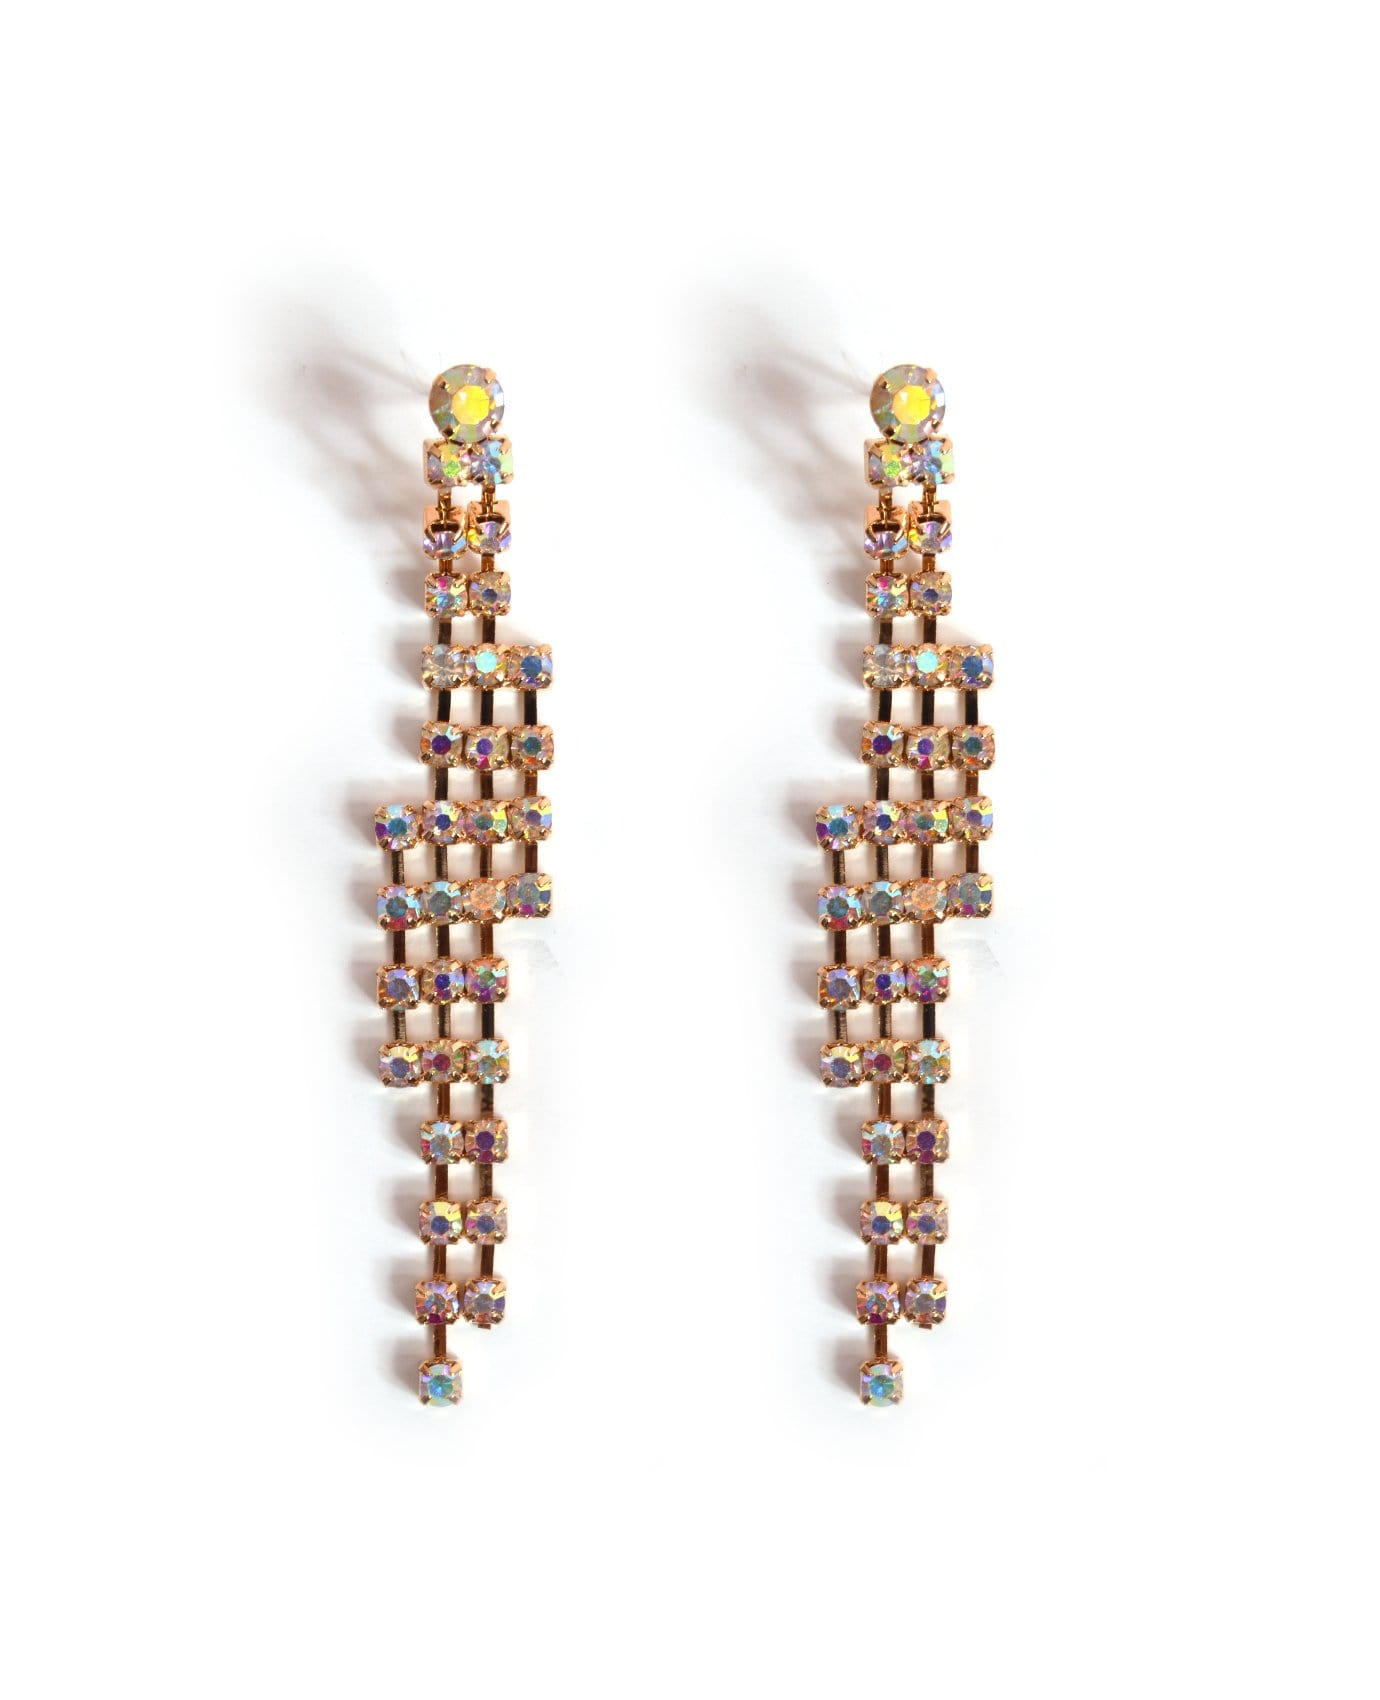 For Party Night Earrings